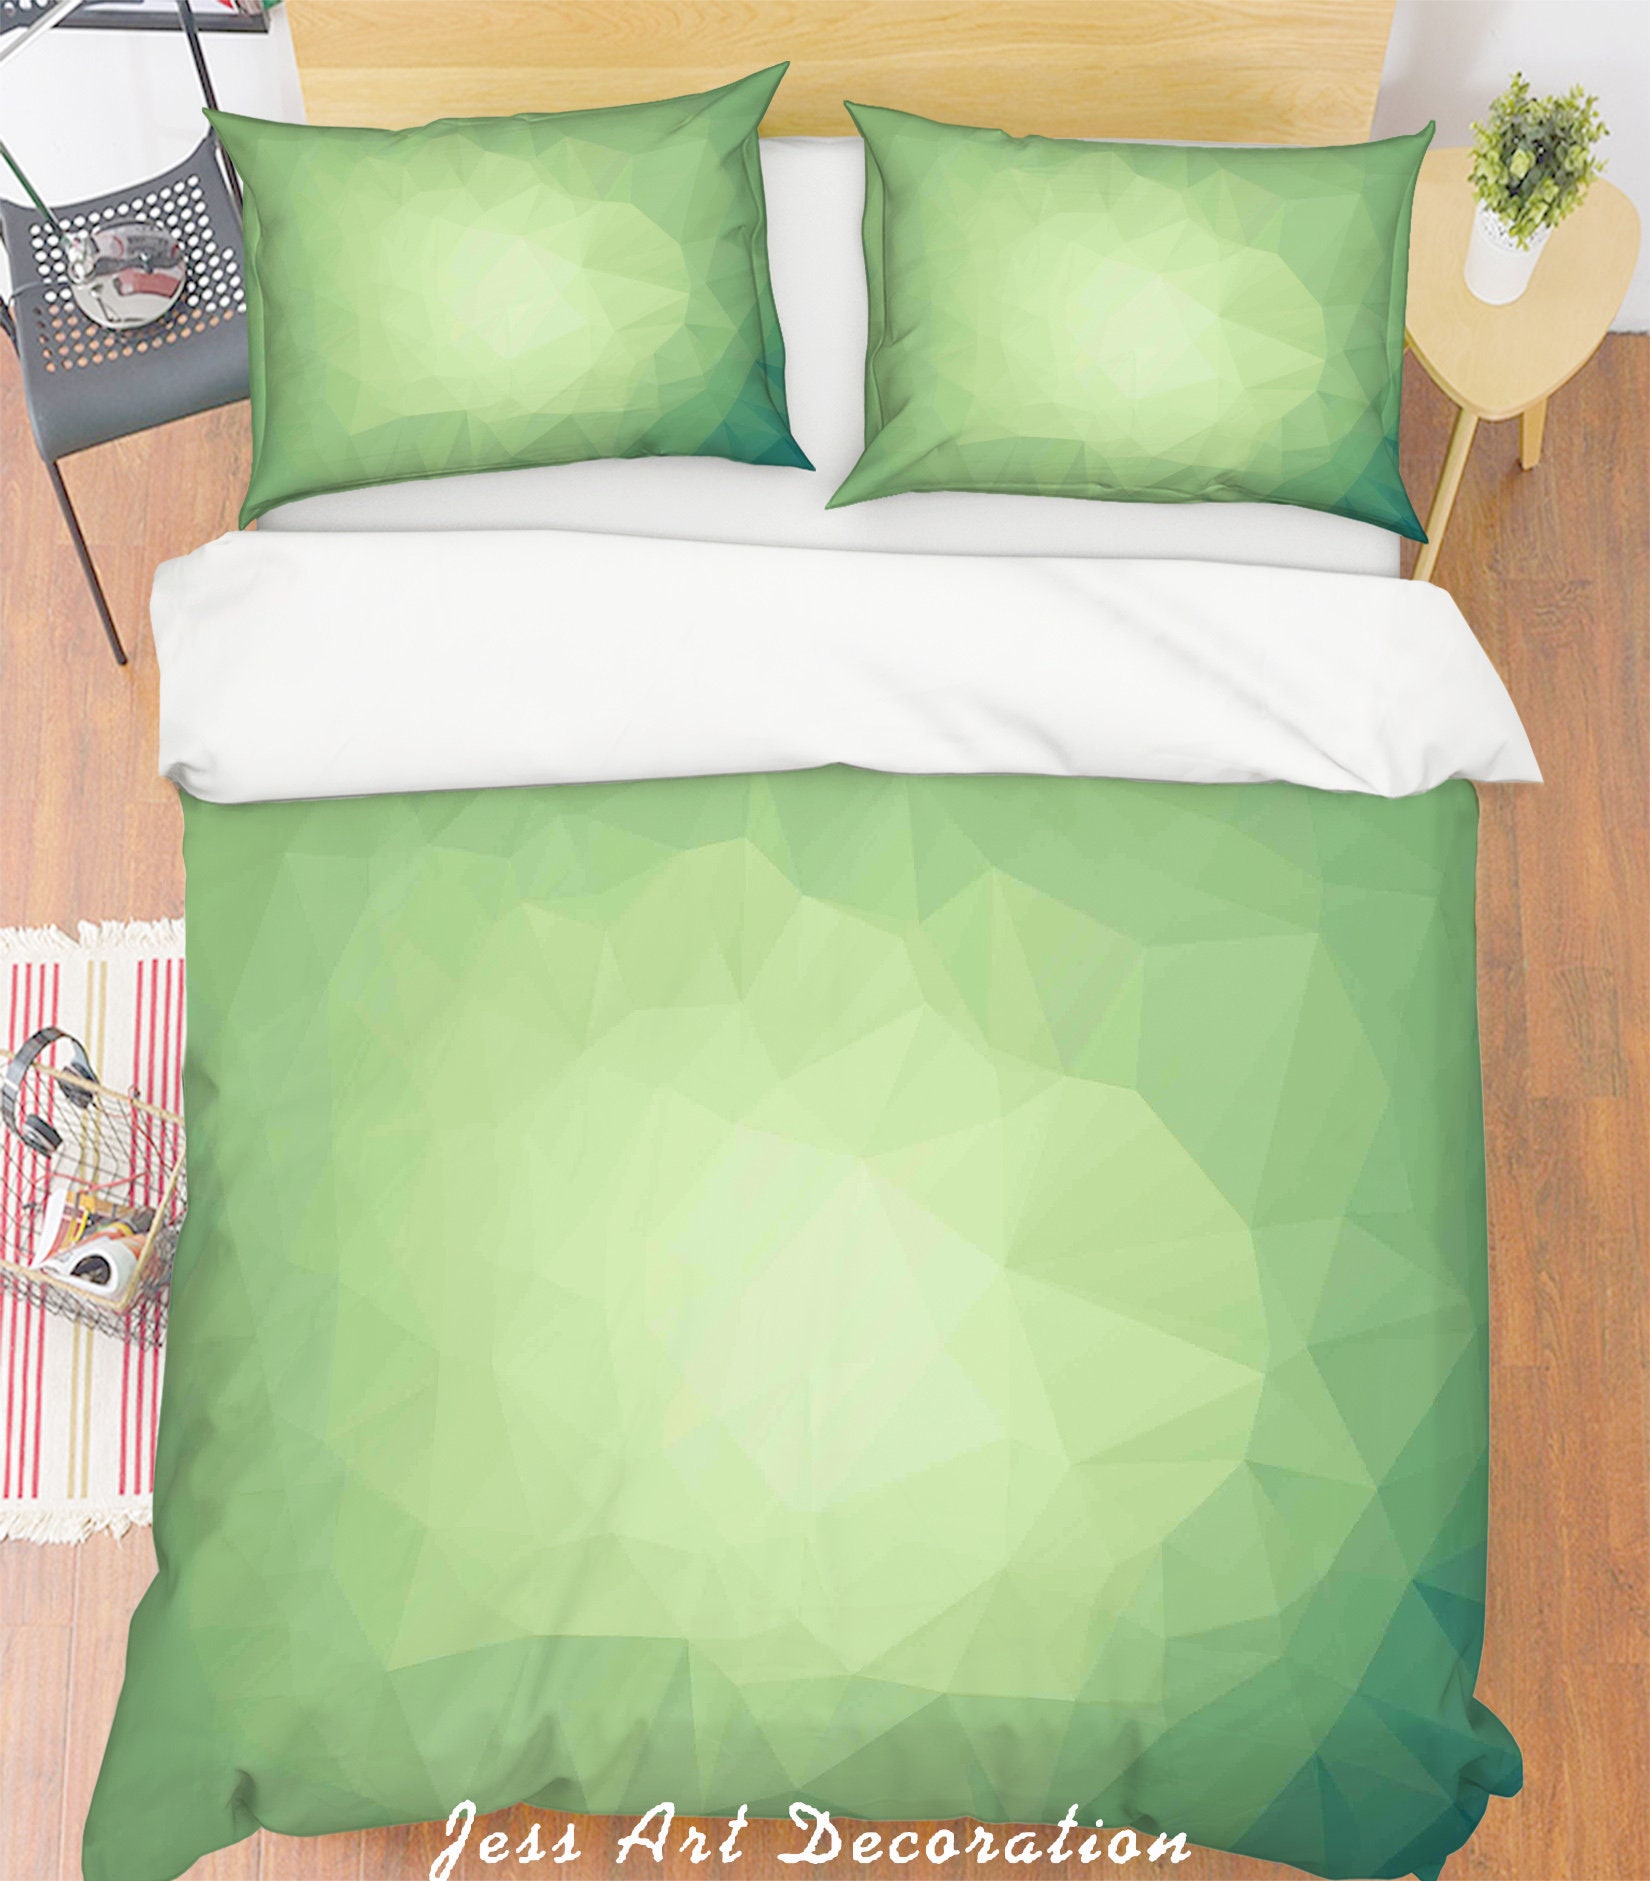 Comforter Cover Flowers Green Duvet Cover Sets Bedding Queen Twin Pillowcases Full California King Personalized FC Quilt Cover